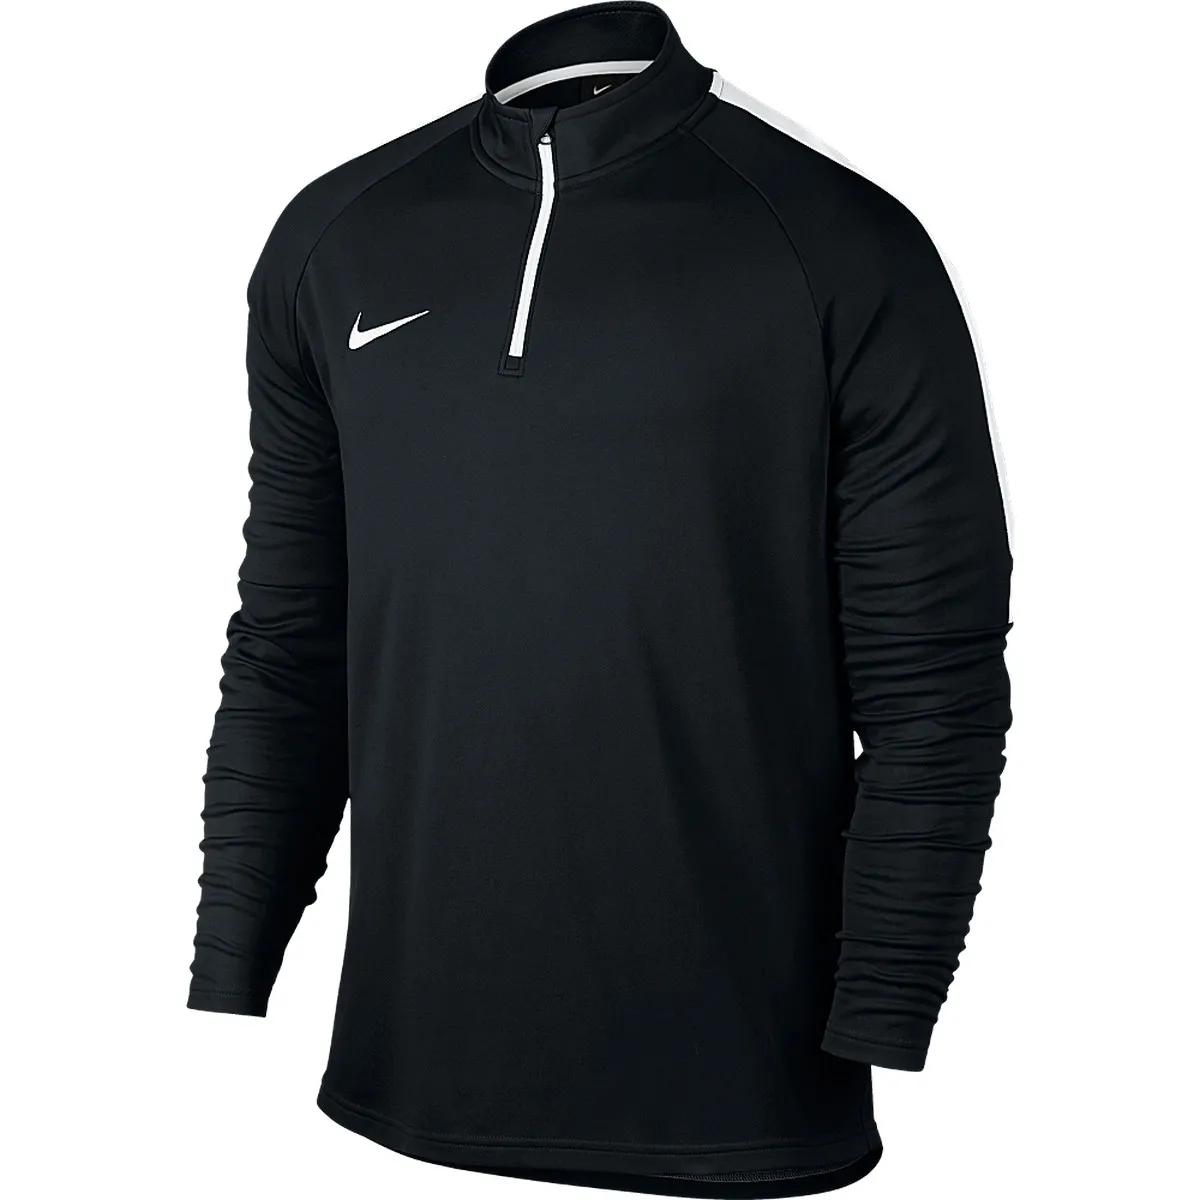 Nike M NK DRY DRIL TOP ACDMY 